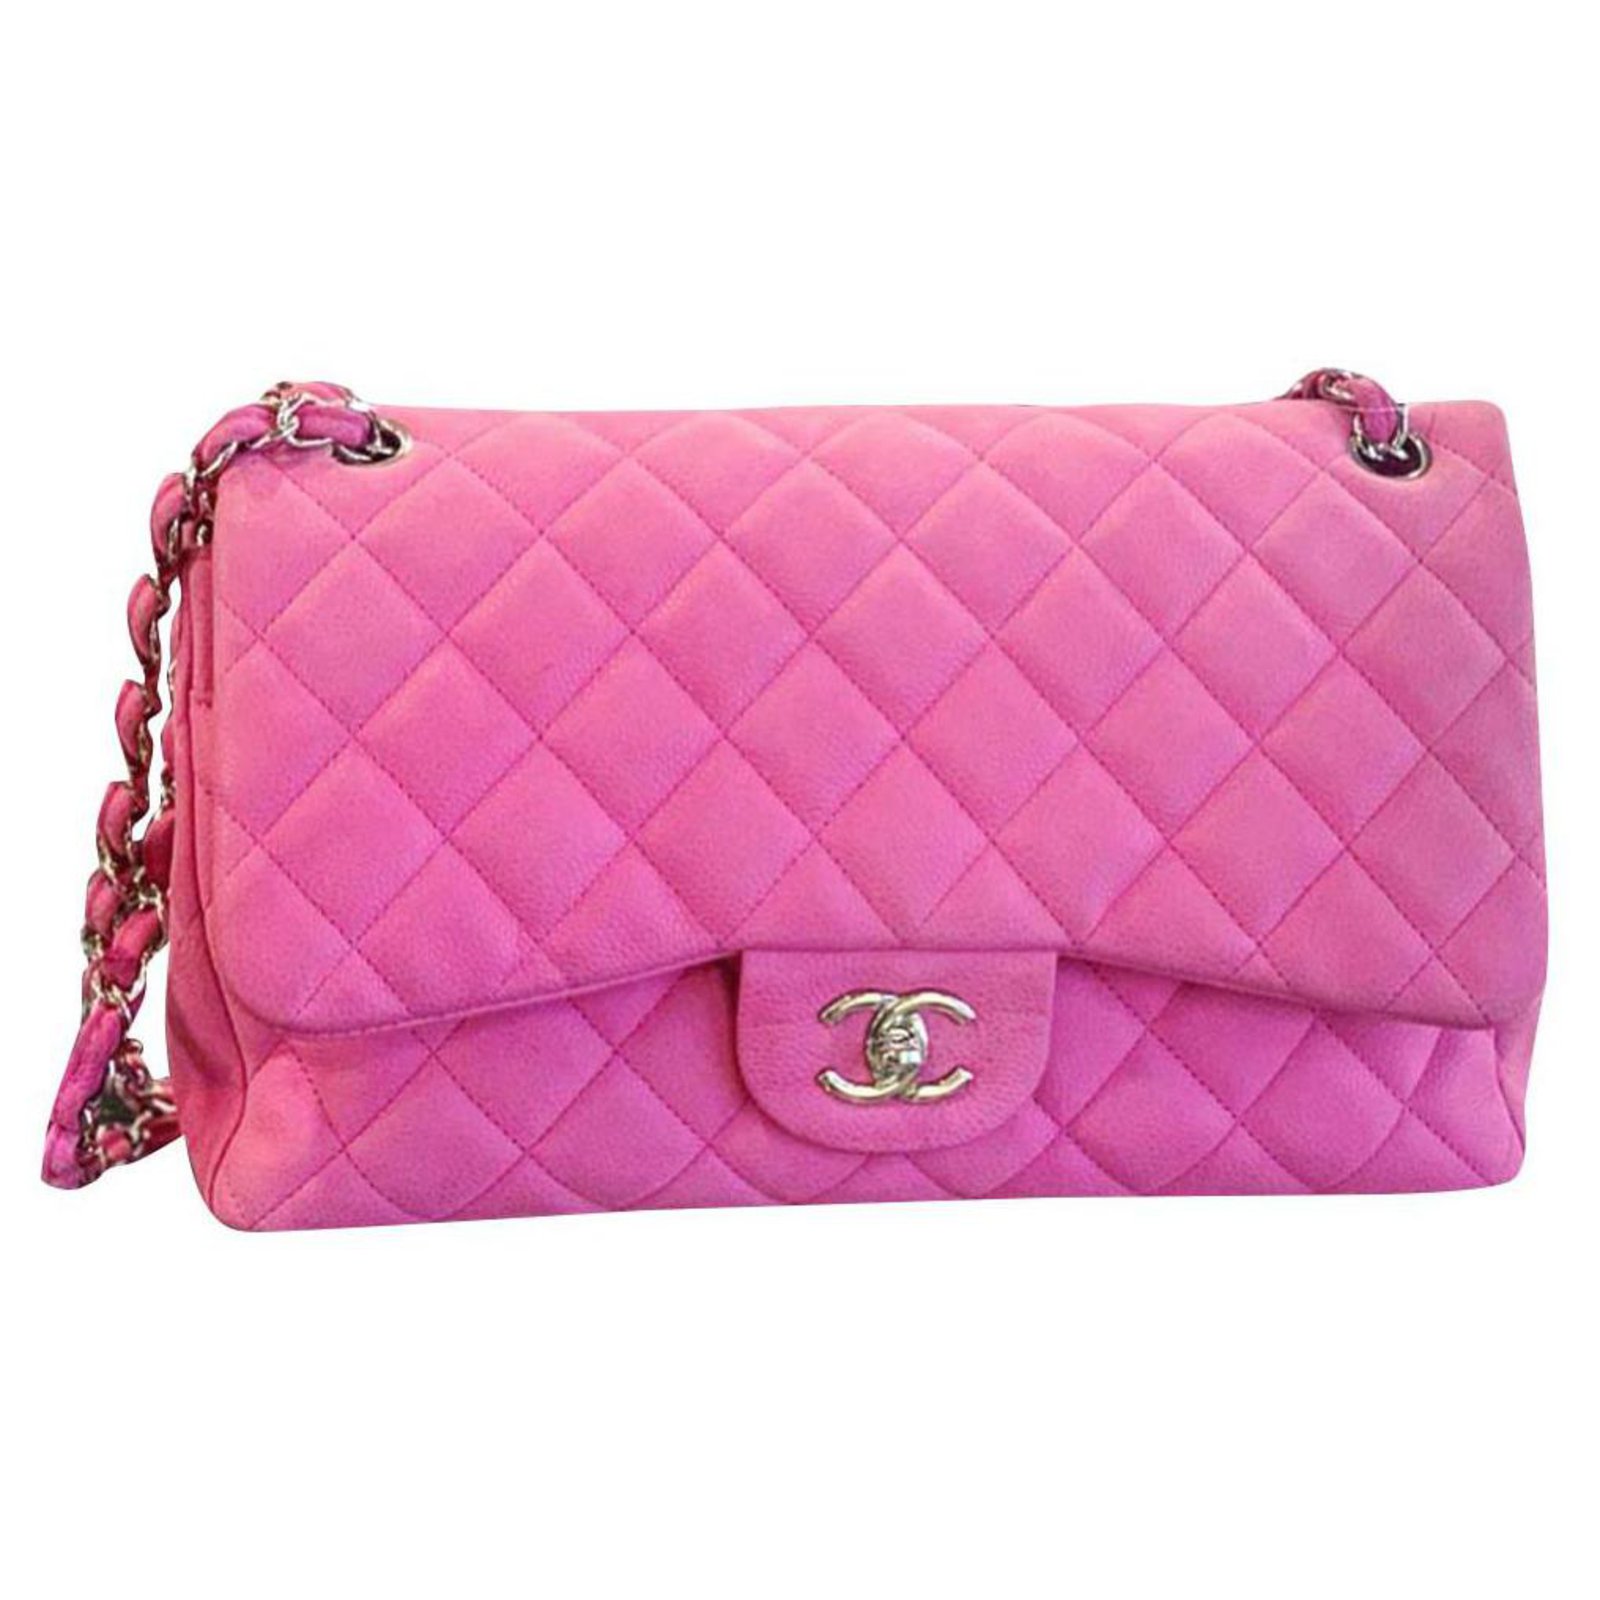 Timeless CHANEL Jumbo Pink Suede Caviar classic flap bag Leather